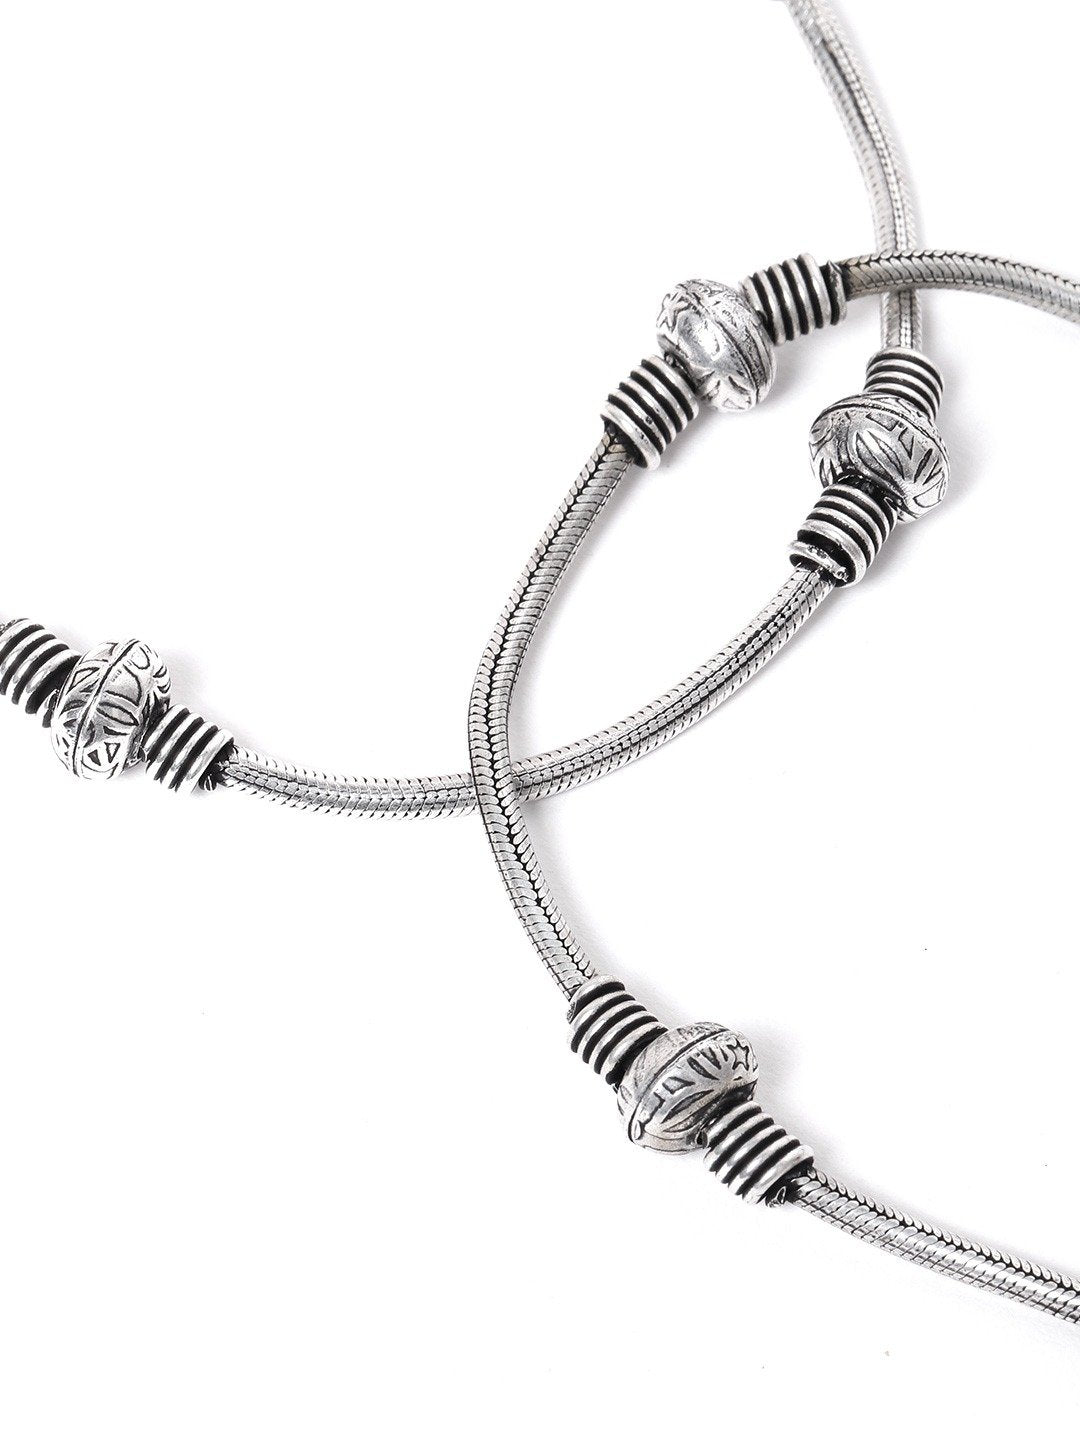 Women's Pair of 2 Oxidized Silver-Plated Anklets - Priyaasi